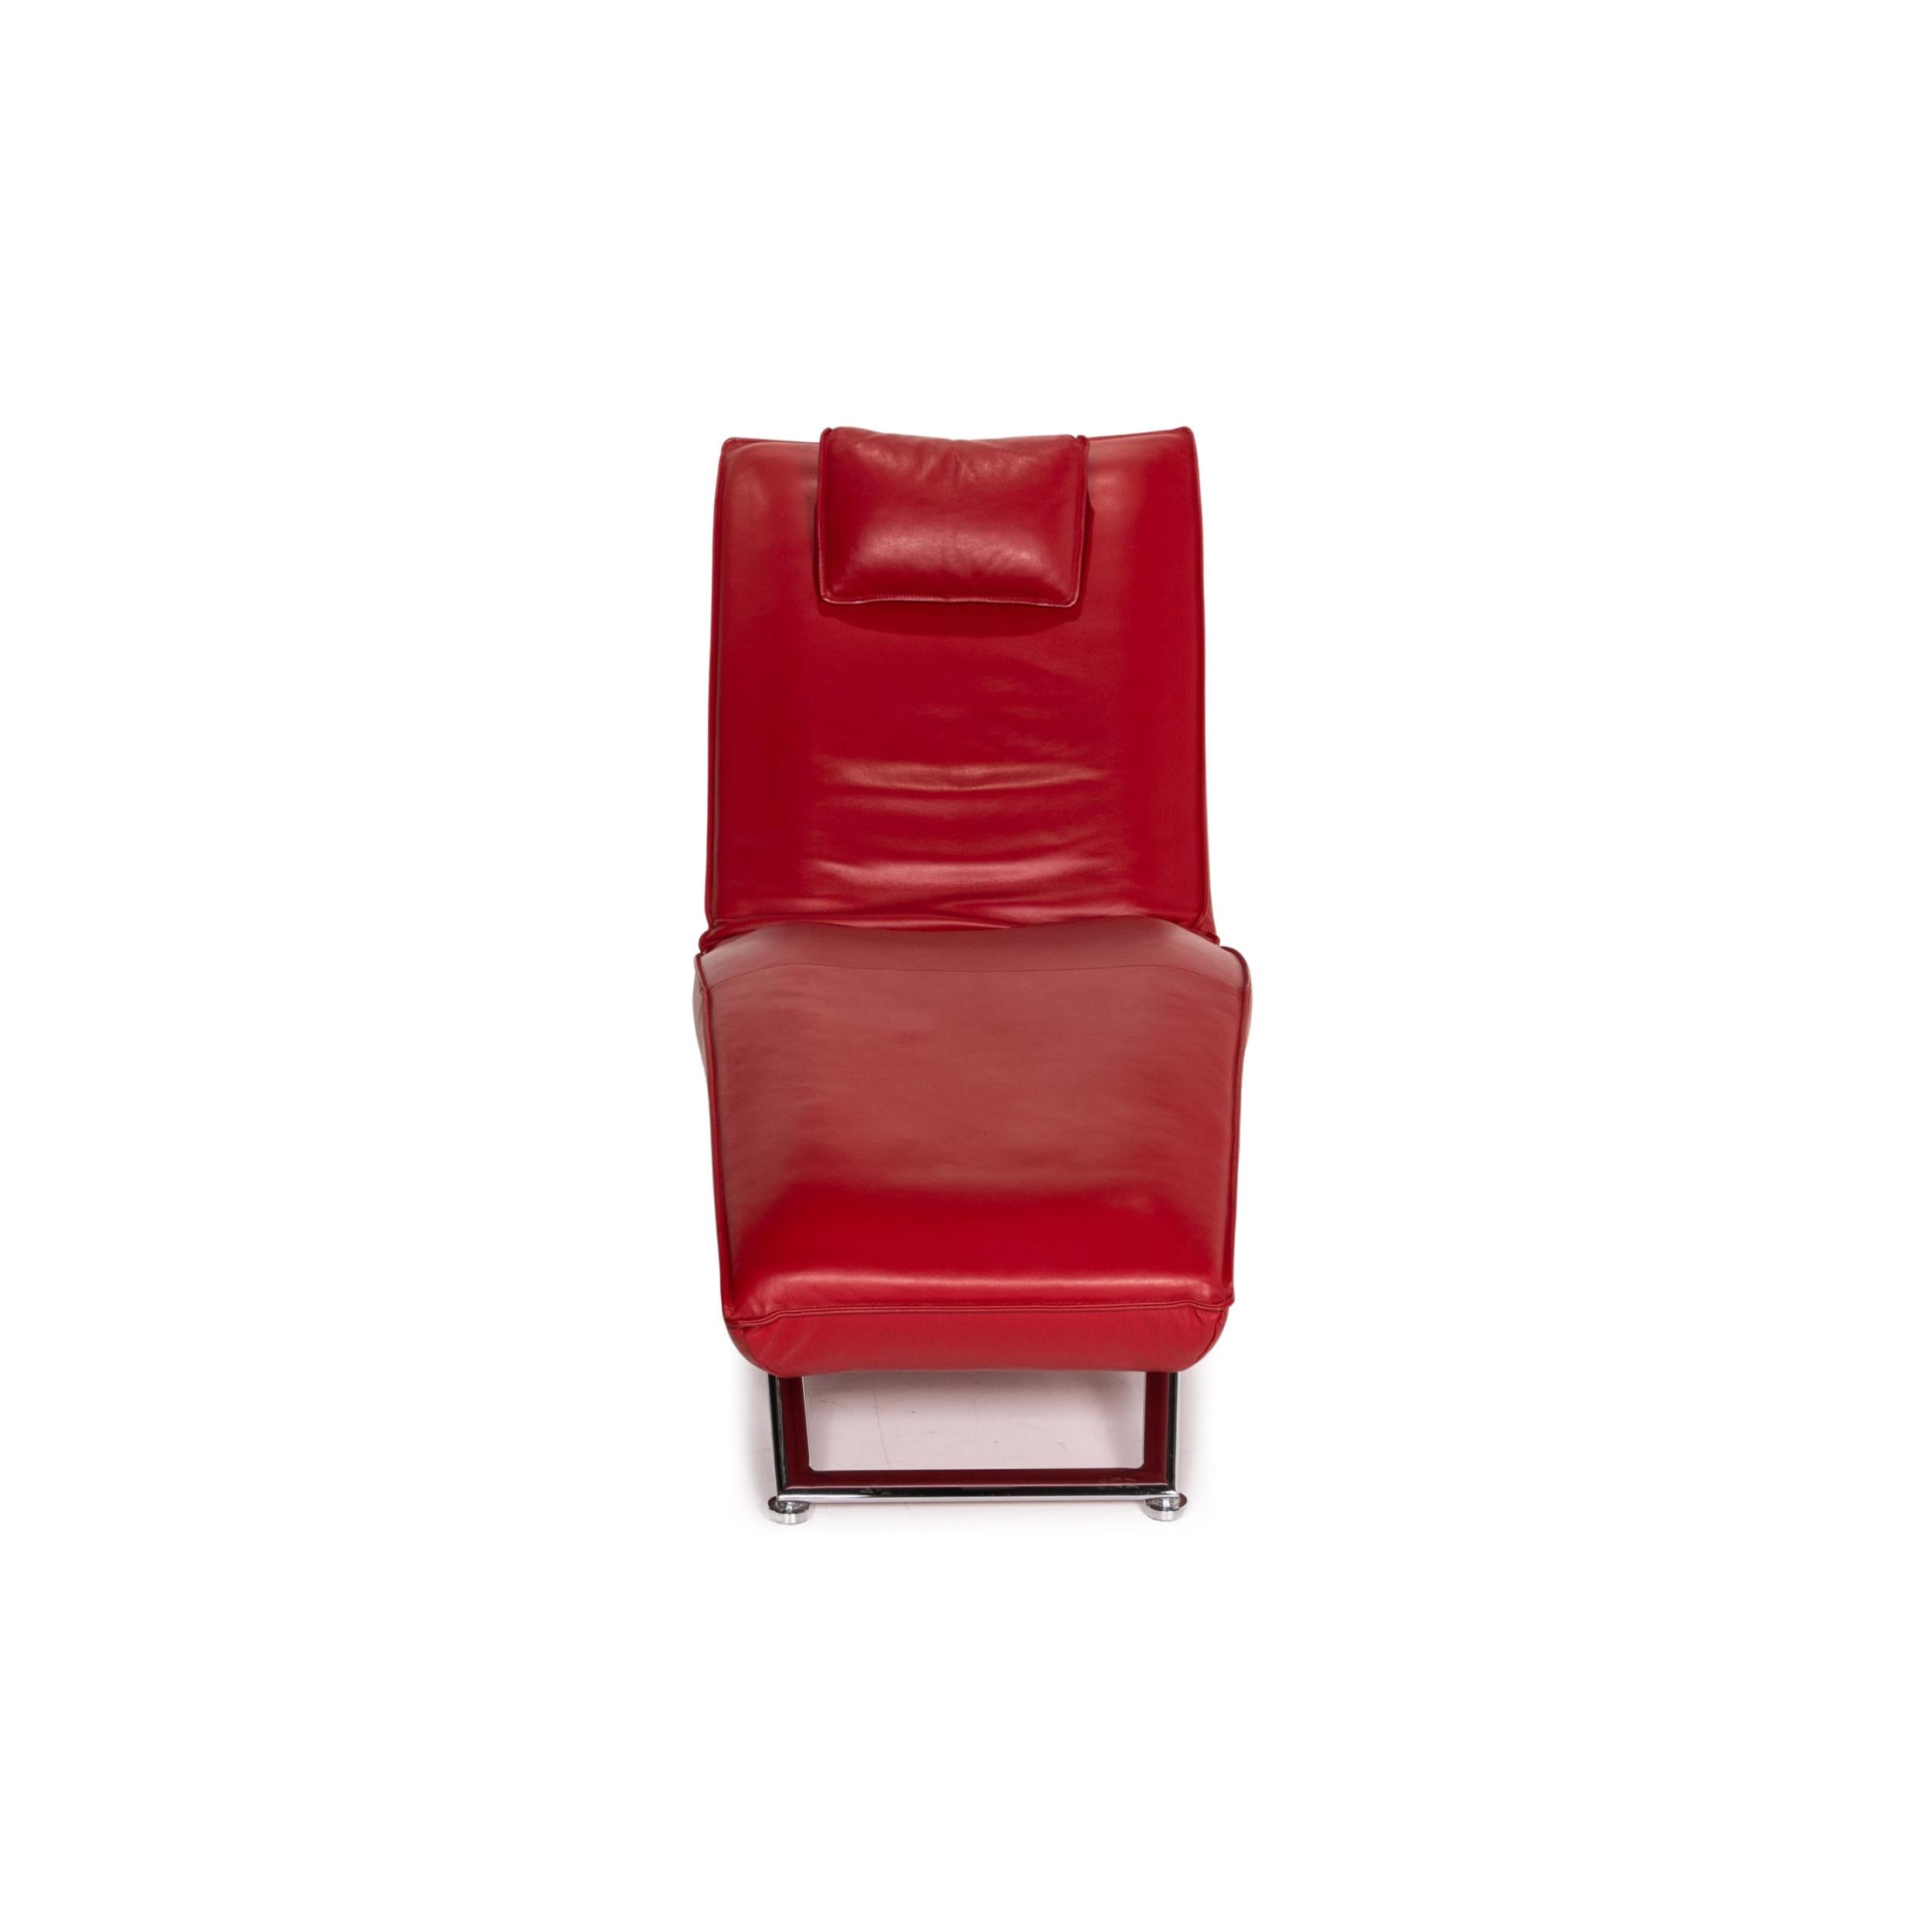 KoinorJeremiah Leather Lounger Red Relaxation Function Relaxation Lounger 3